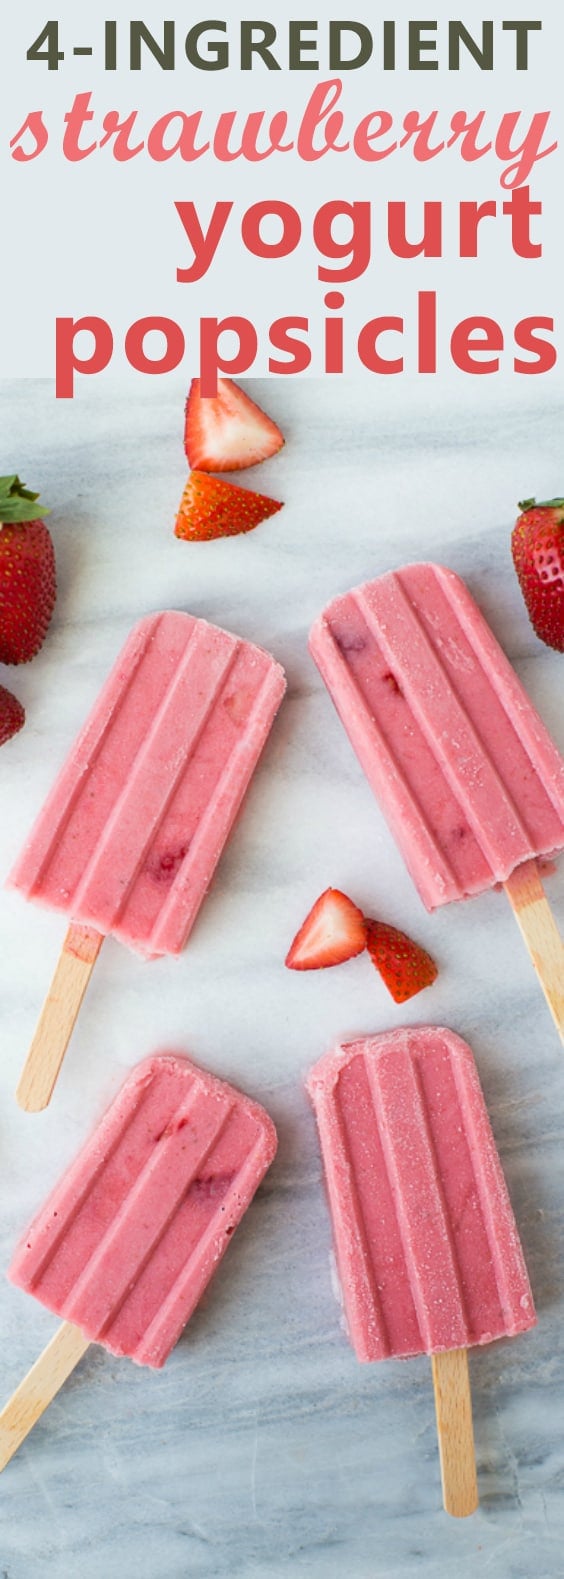 4-Ingredient Healthy Strawberry Popsicles! A creamy treat that couldn't be easier to make! Sweetened with honey and easily made dairy-free.